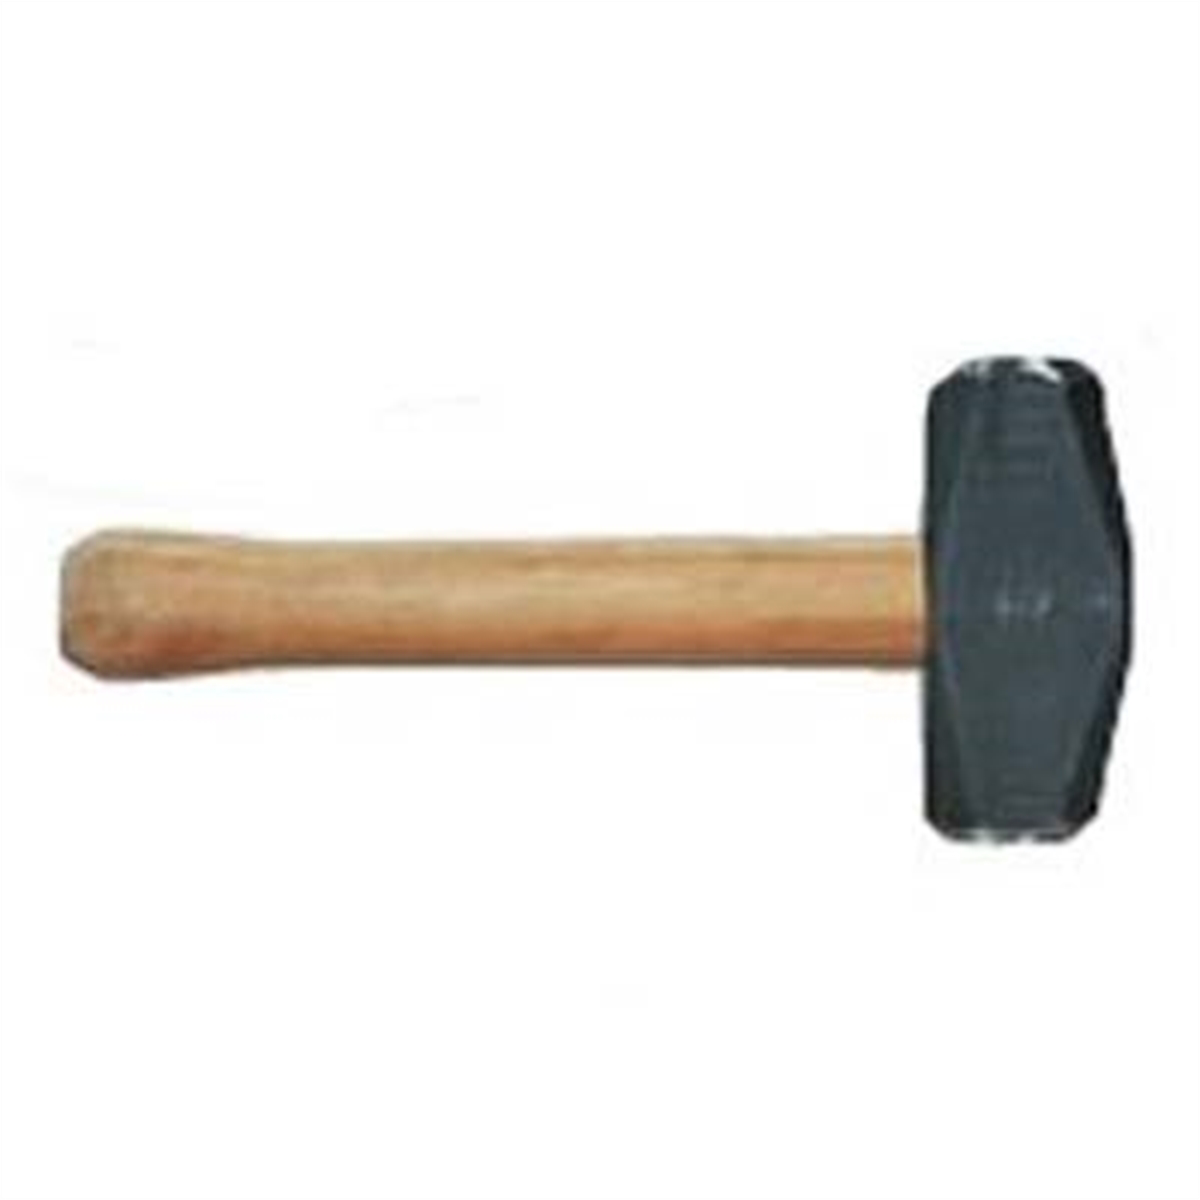 New England Pattern Hand-Drilling Hammer 80H-3 - 3 Lb